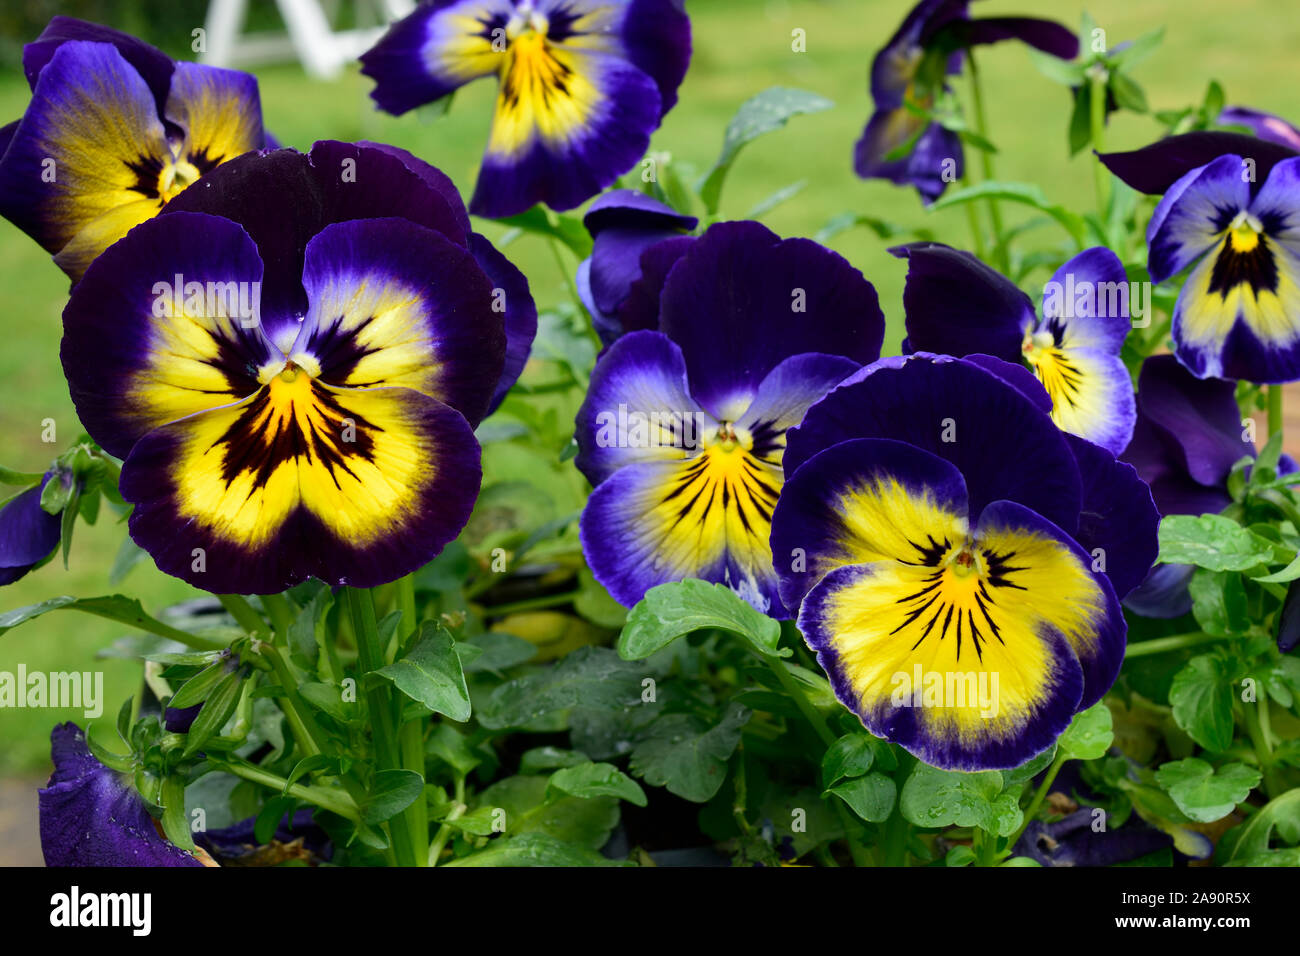 Pansy or Viola. Midnight Glow close up two blue flowers with yellow toward centre. Stock Photo